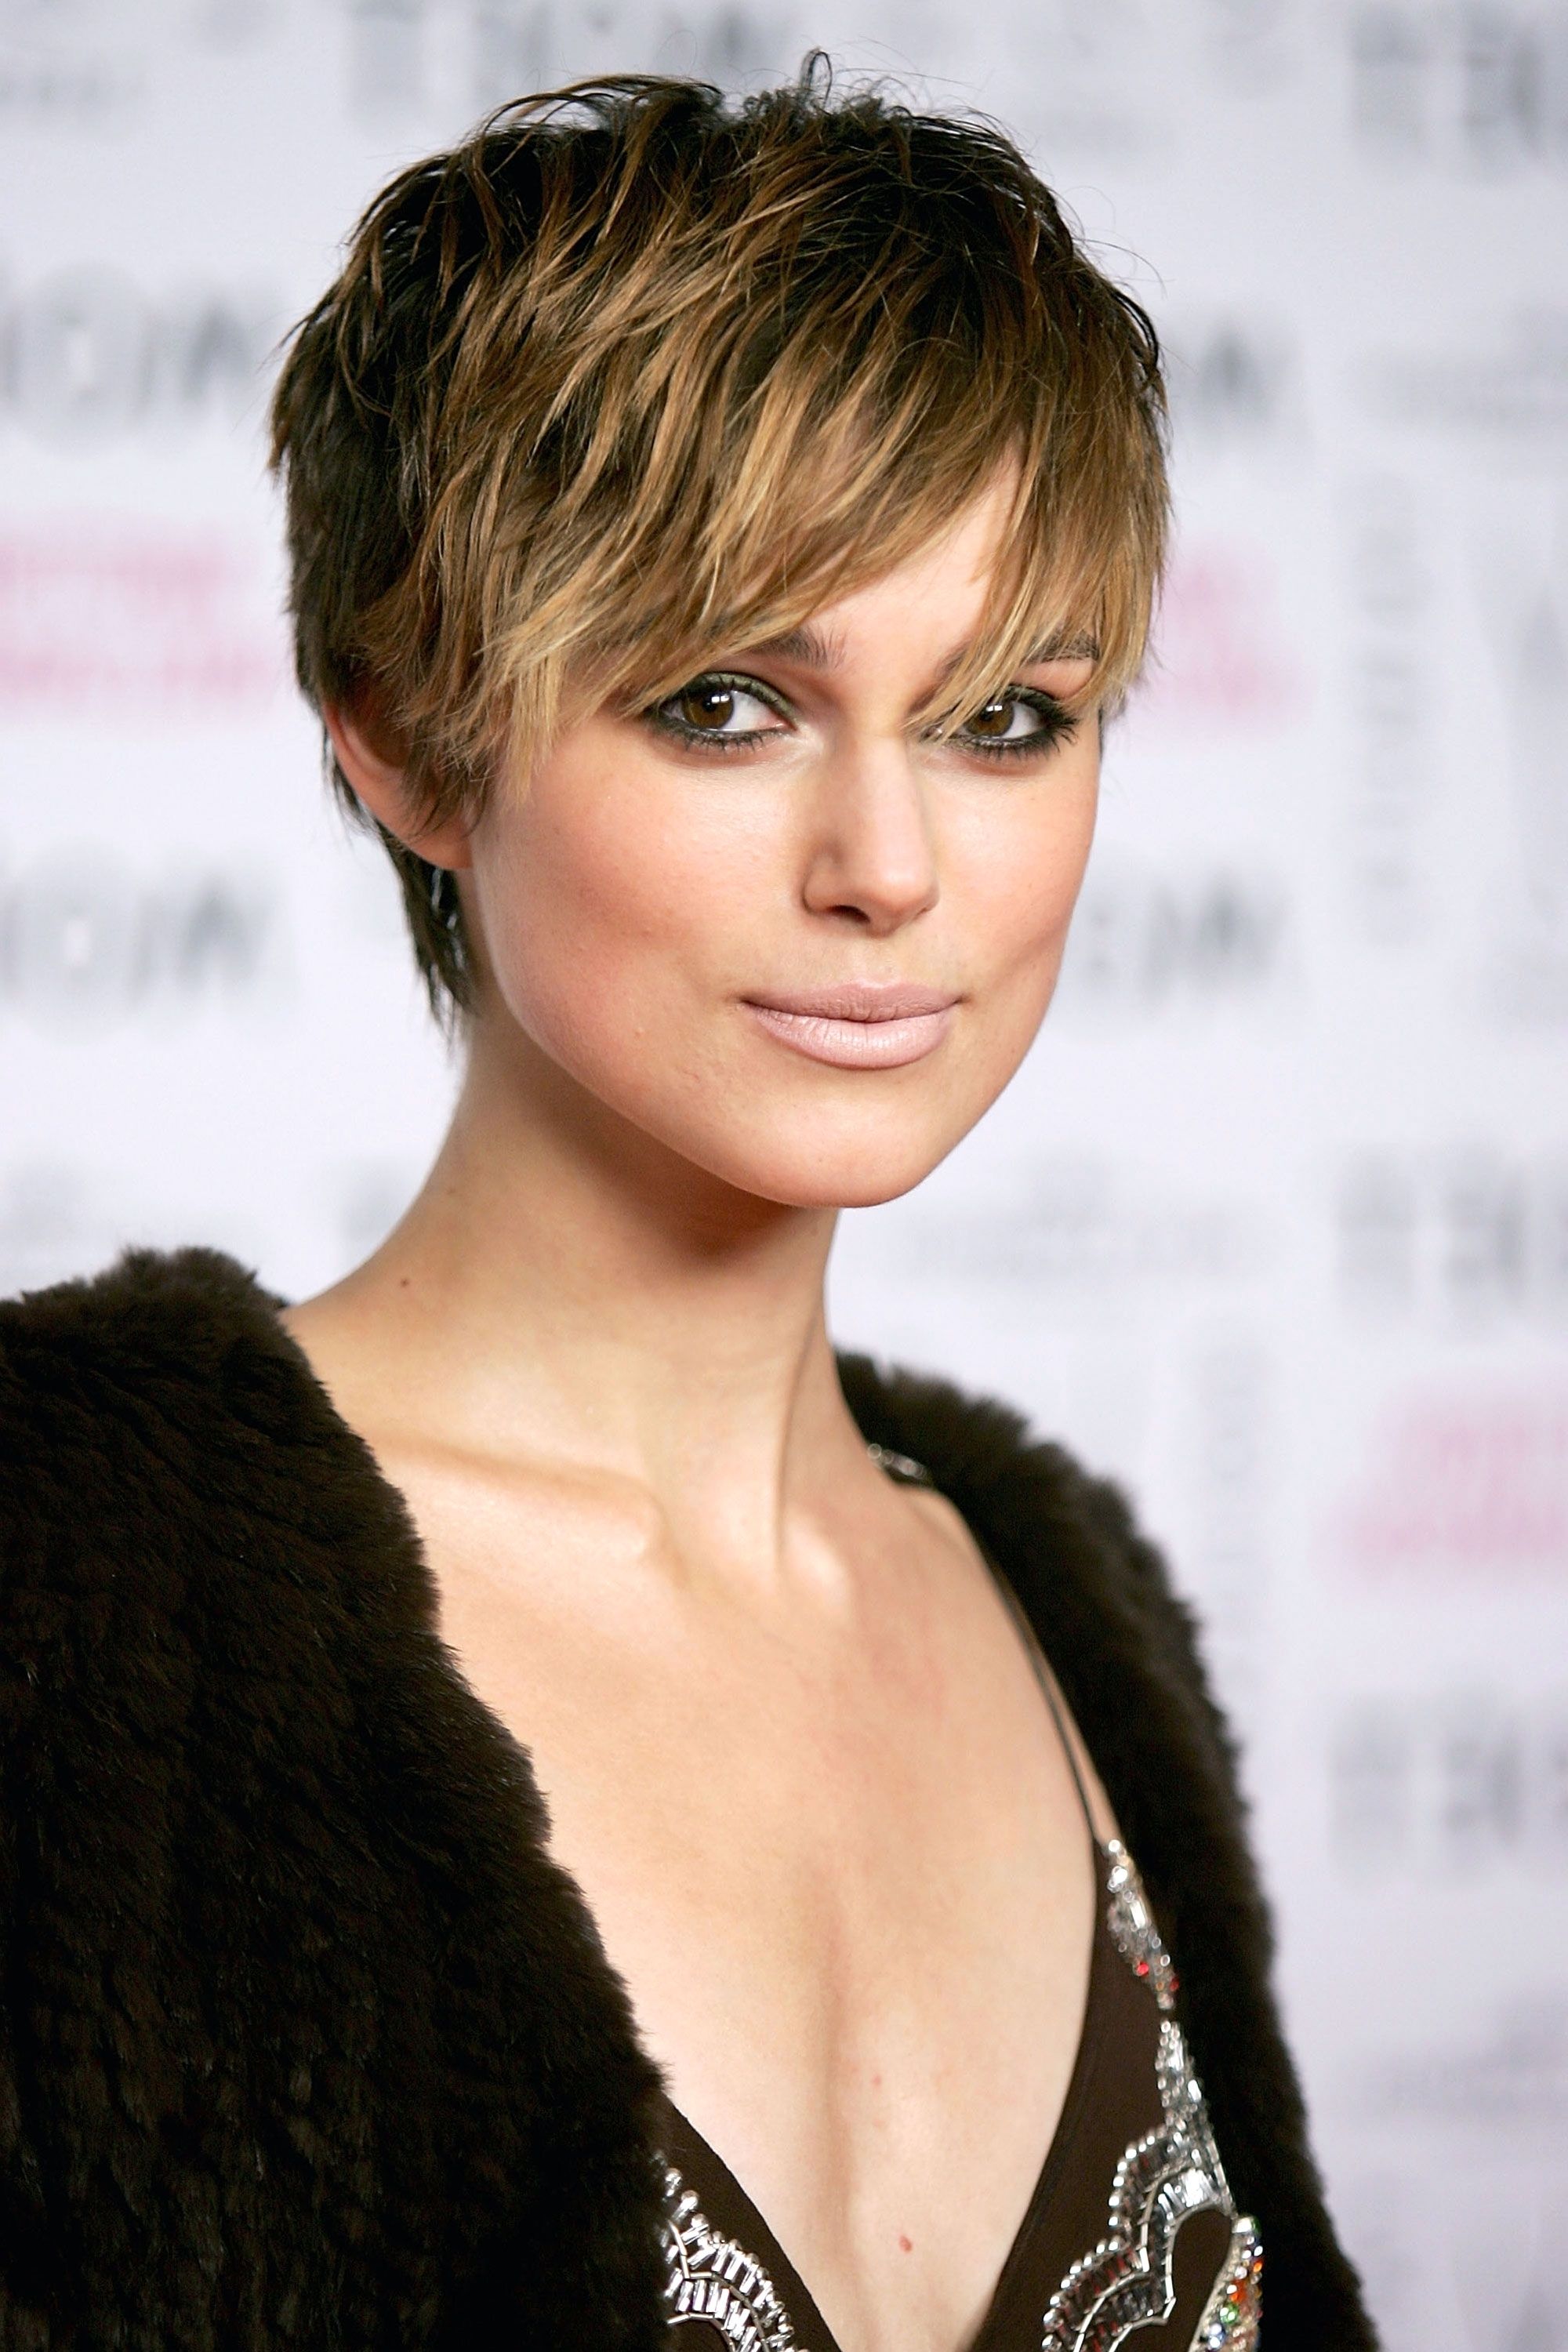 40 Pixie Cuts We Love For 2017 Short Pixie Hairstyles From Inside Intended For Latest Short Pixie Hairstyles With Bangs (View 3 of 15)